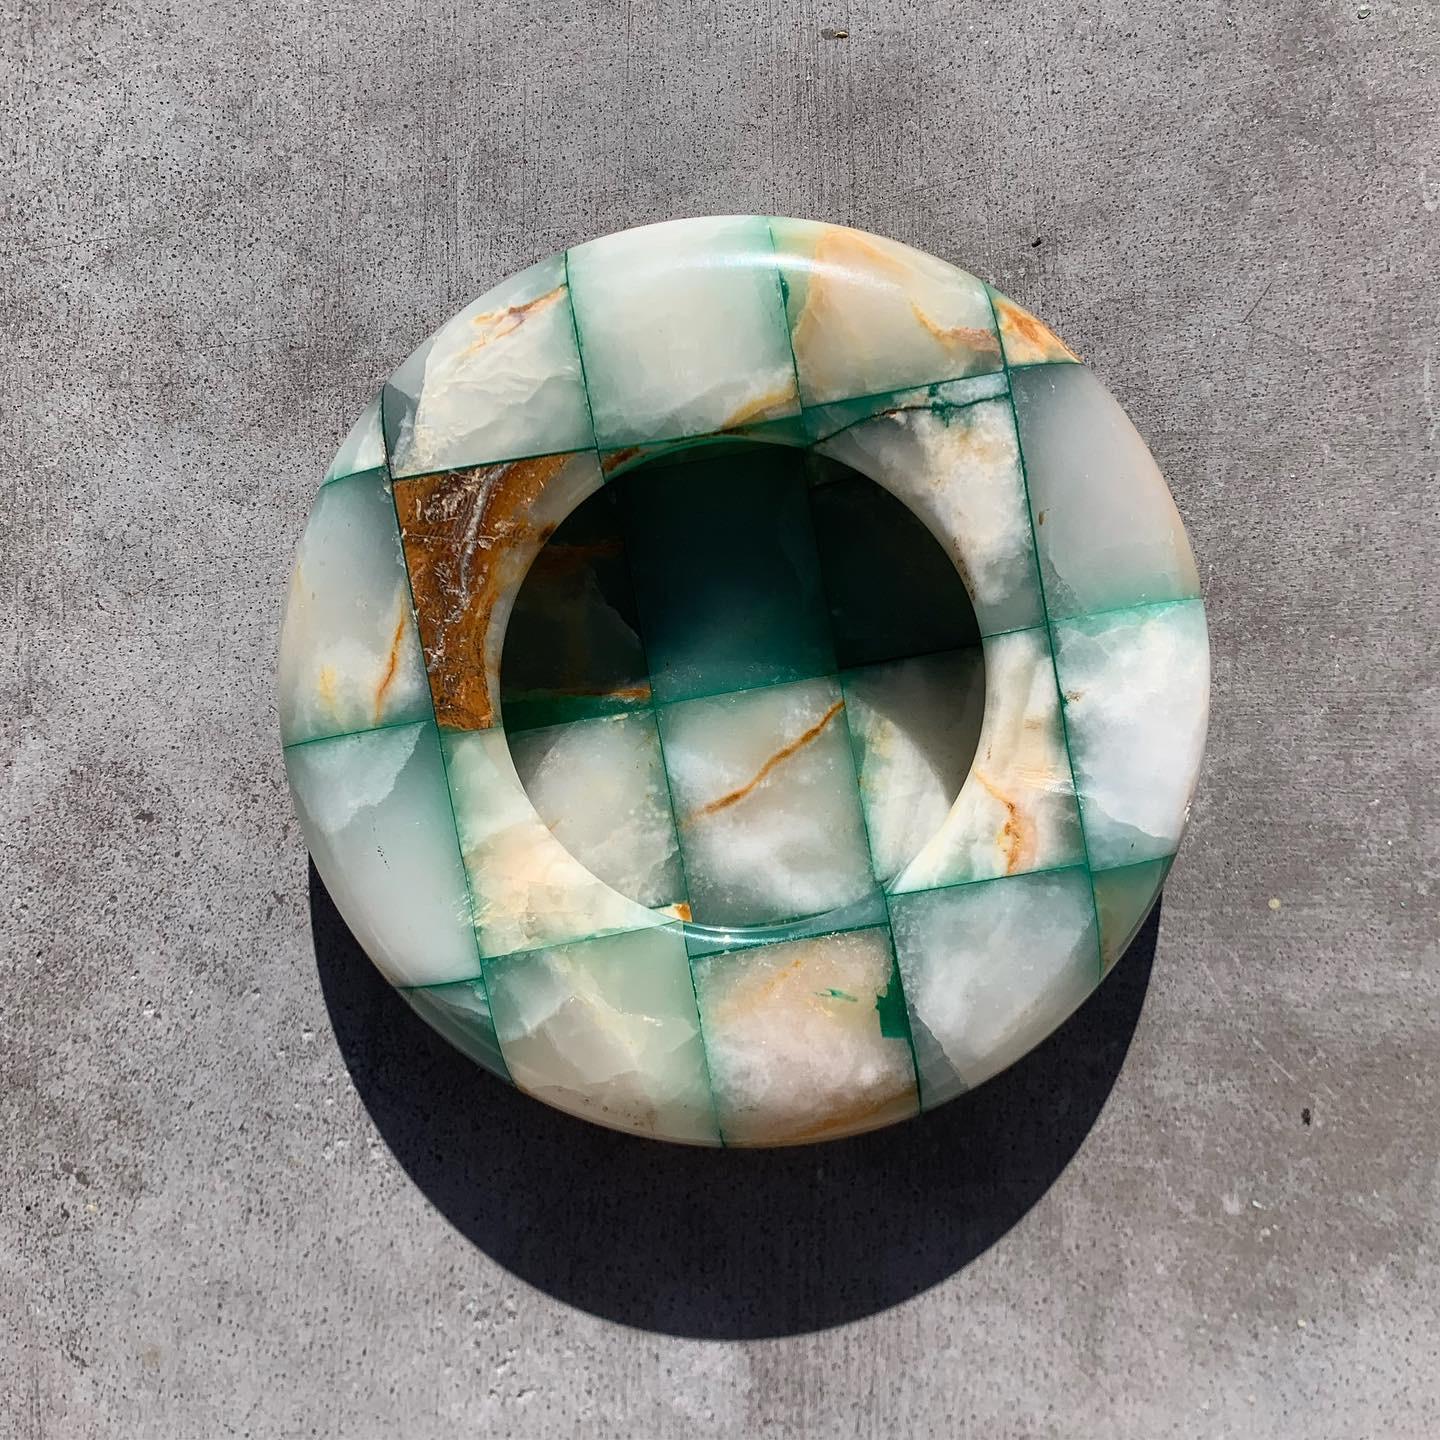 An incredibly unique Mid-Century Modern checkered onyx marble ashtray with thick curved bulbous edge, circa 1960s. Teal and pearl tones with moments of caramel. Would also work fabulously as a catchall. Minor signs of wear consistent with age but no